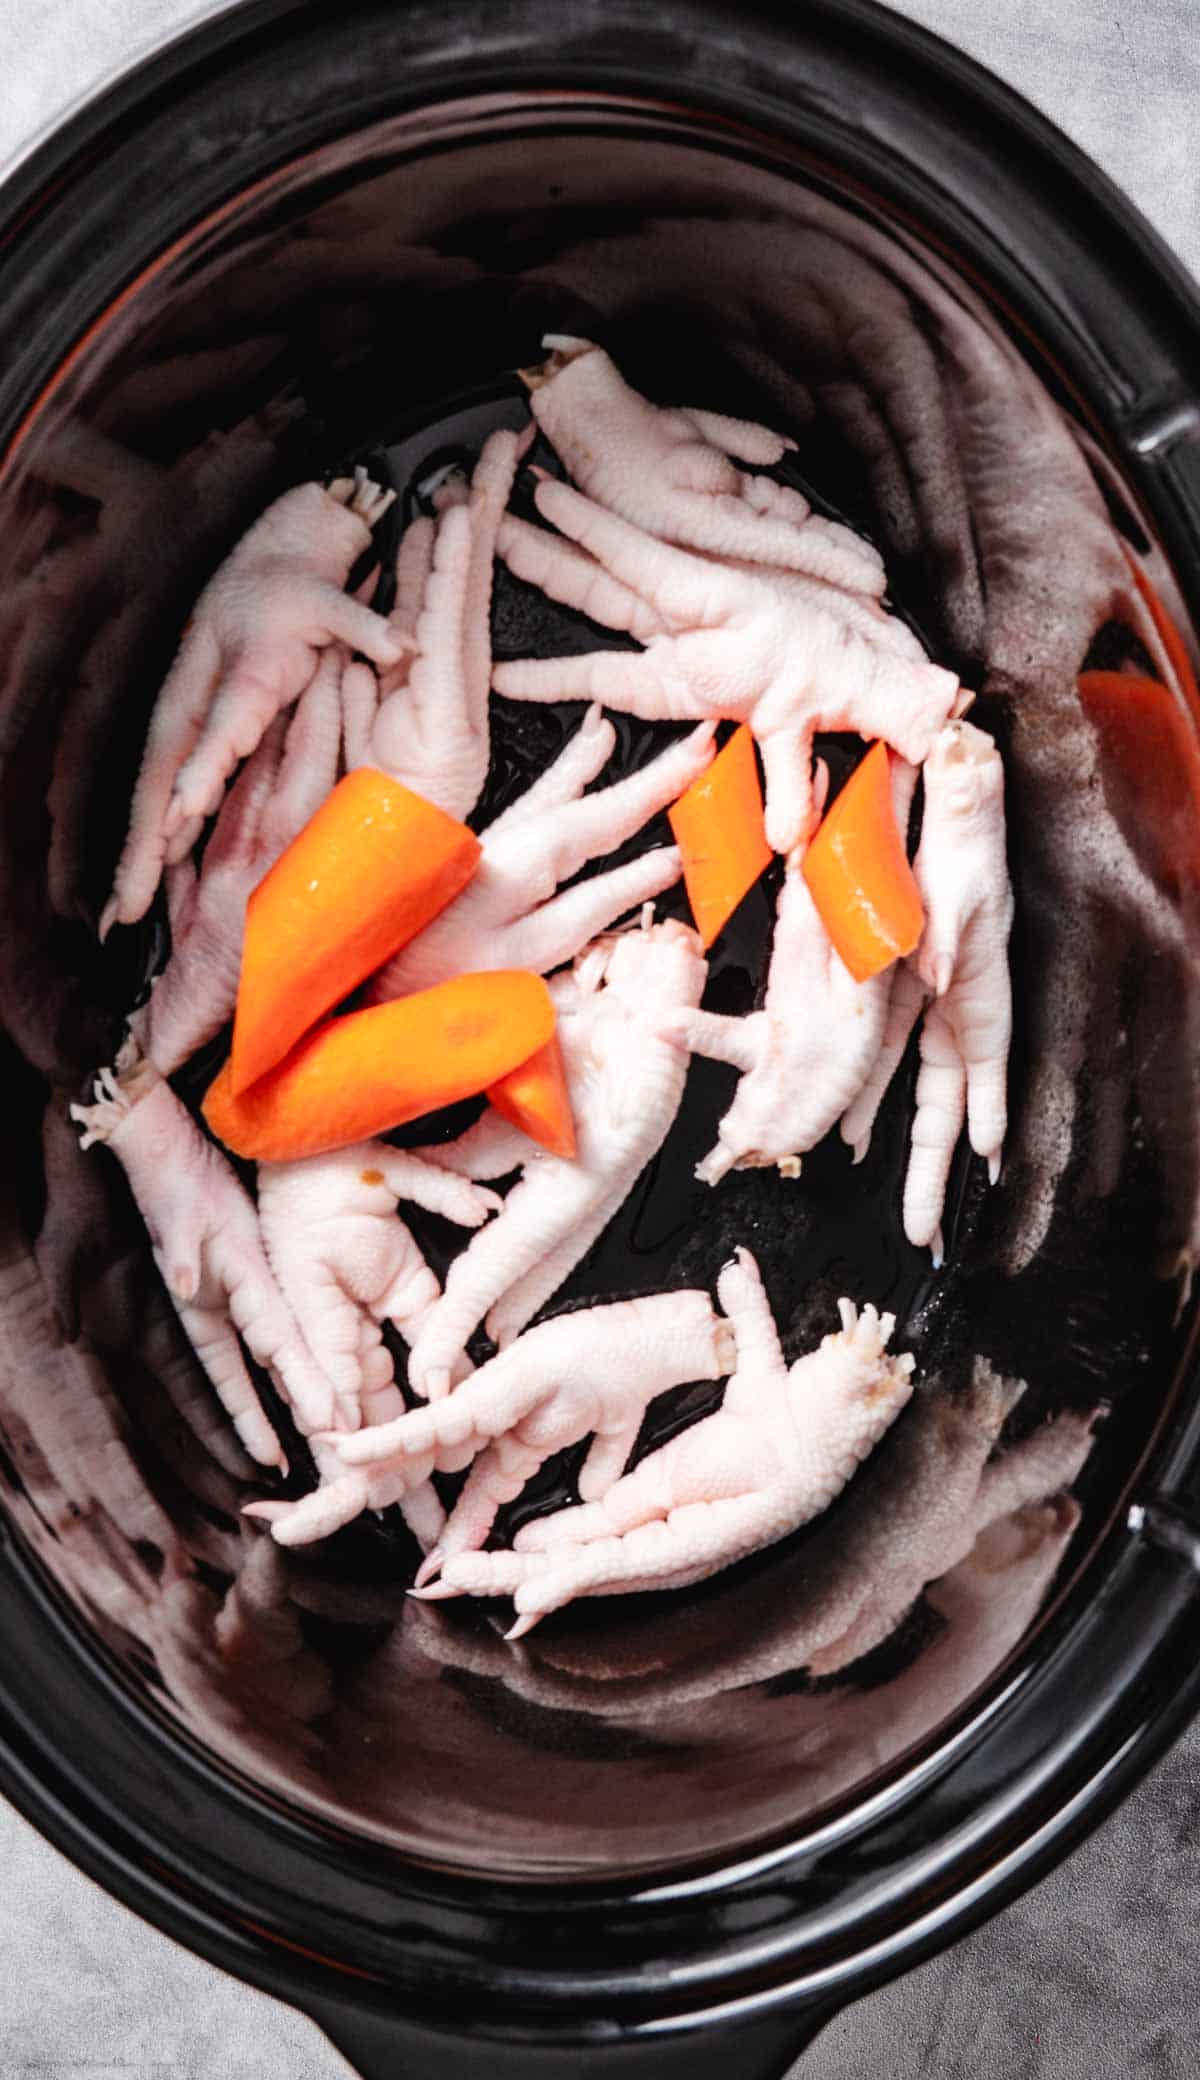 Chicken feet and carrots in a slow cooker.